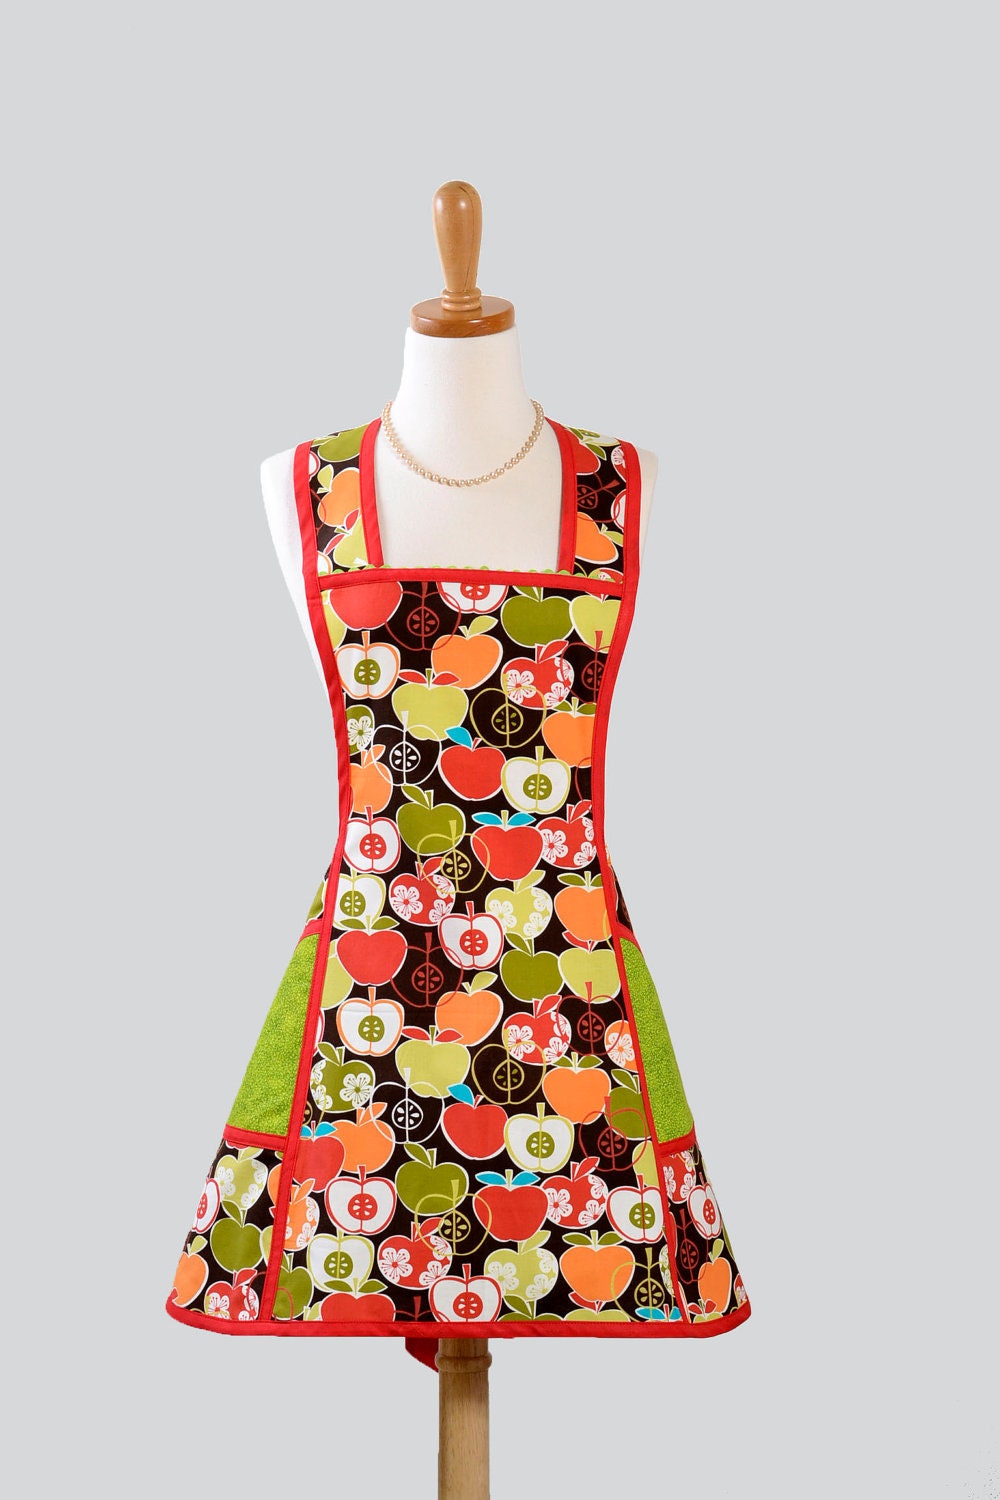 Vintage Inspired Apron : Sassy Short Retro Style Apron in Fall Bite Me Apple Orchard of Red and Green on Chocolate Brown